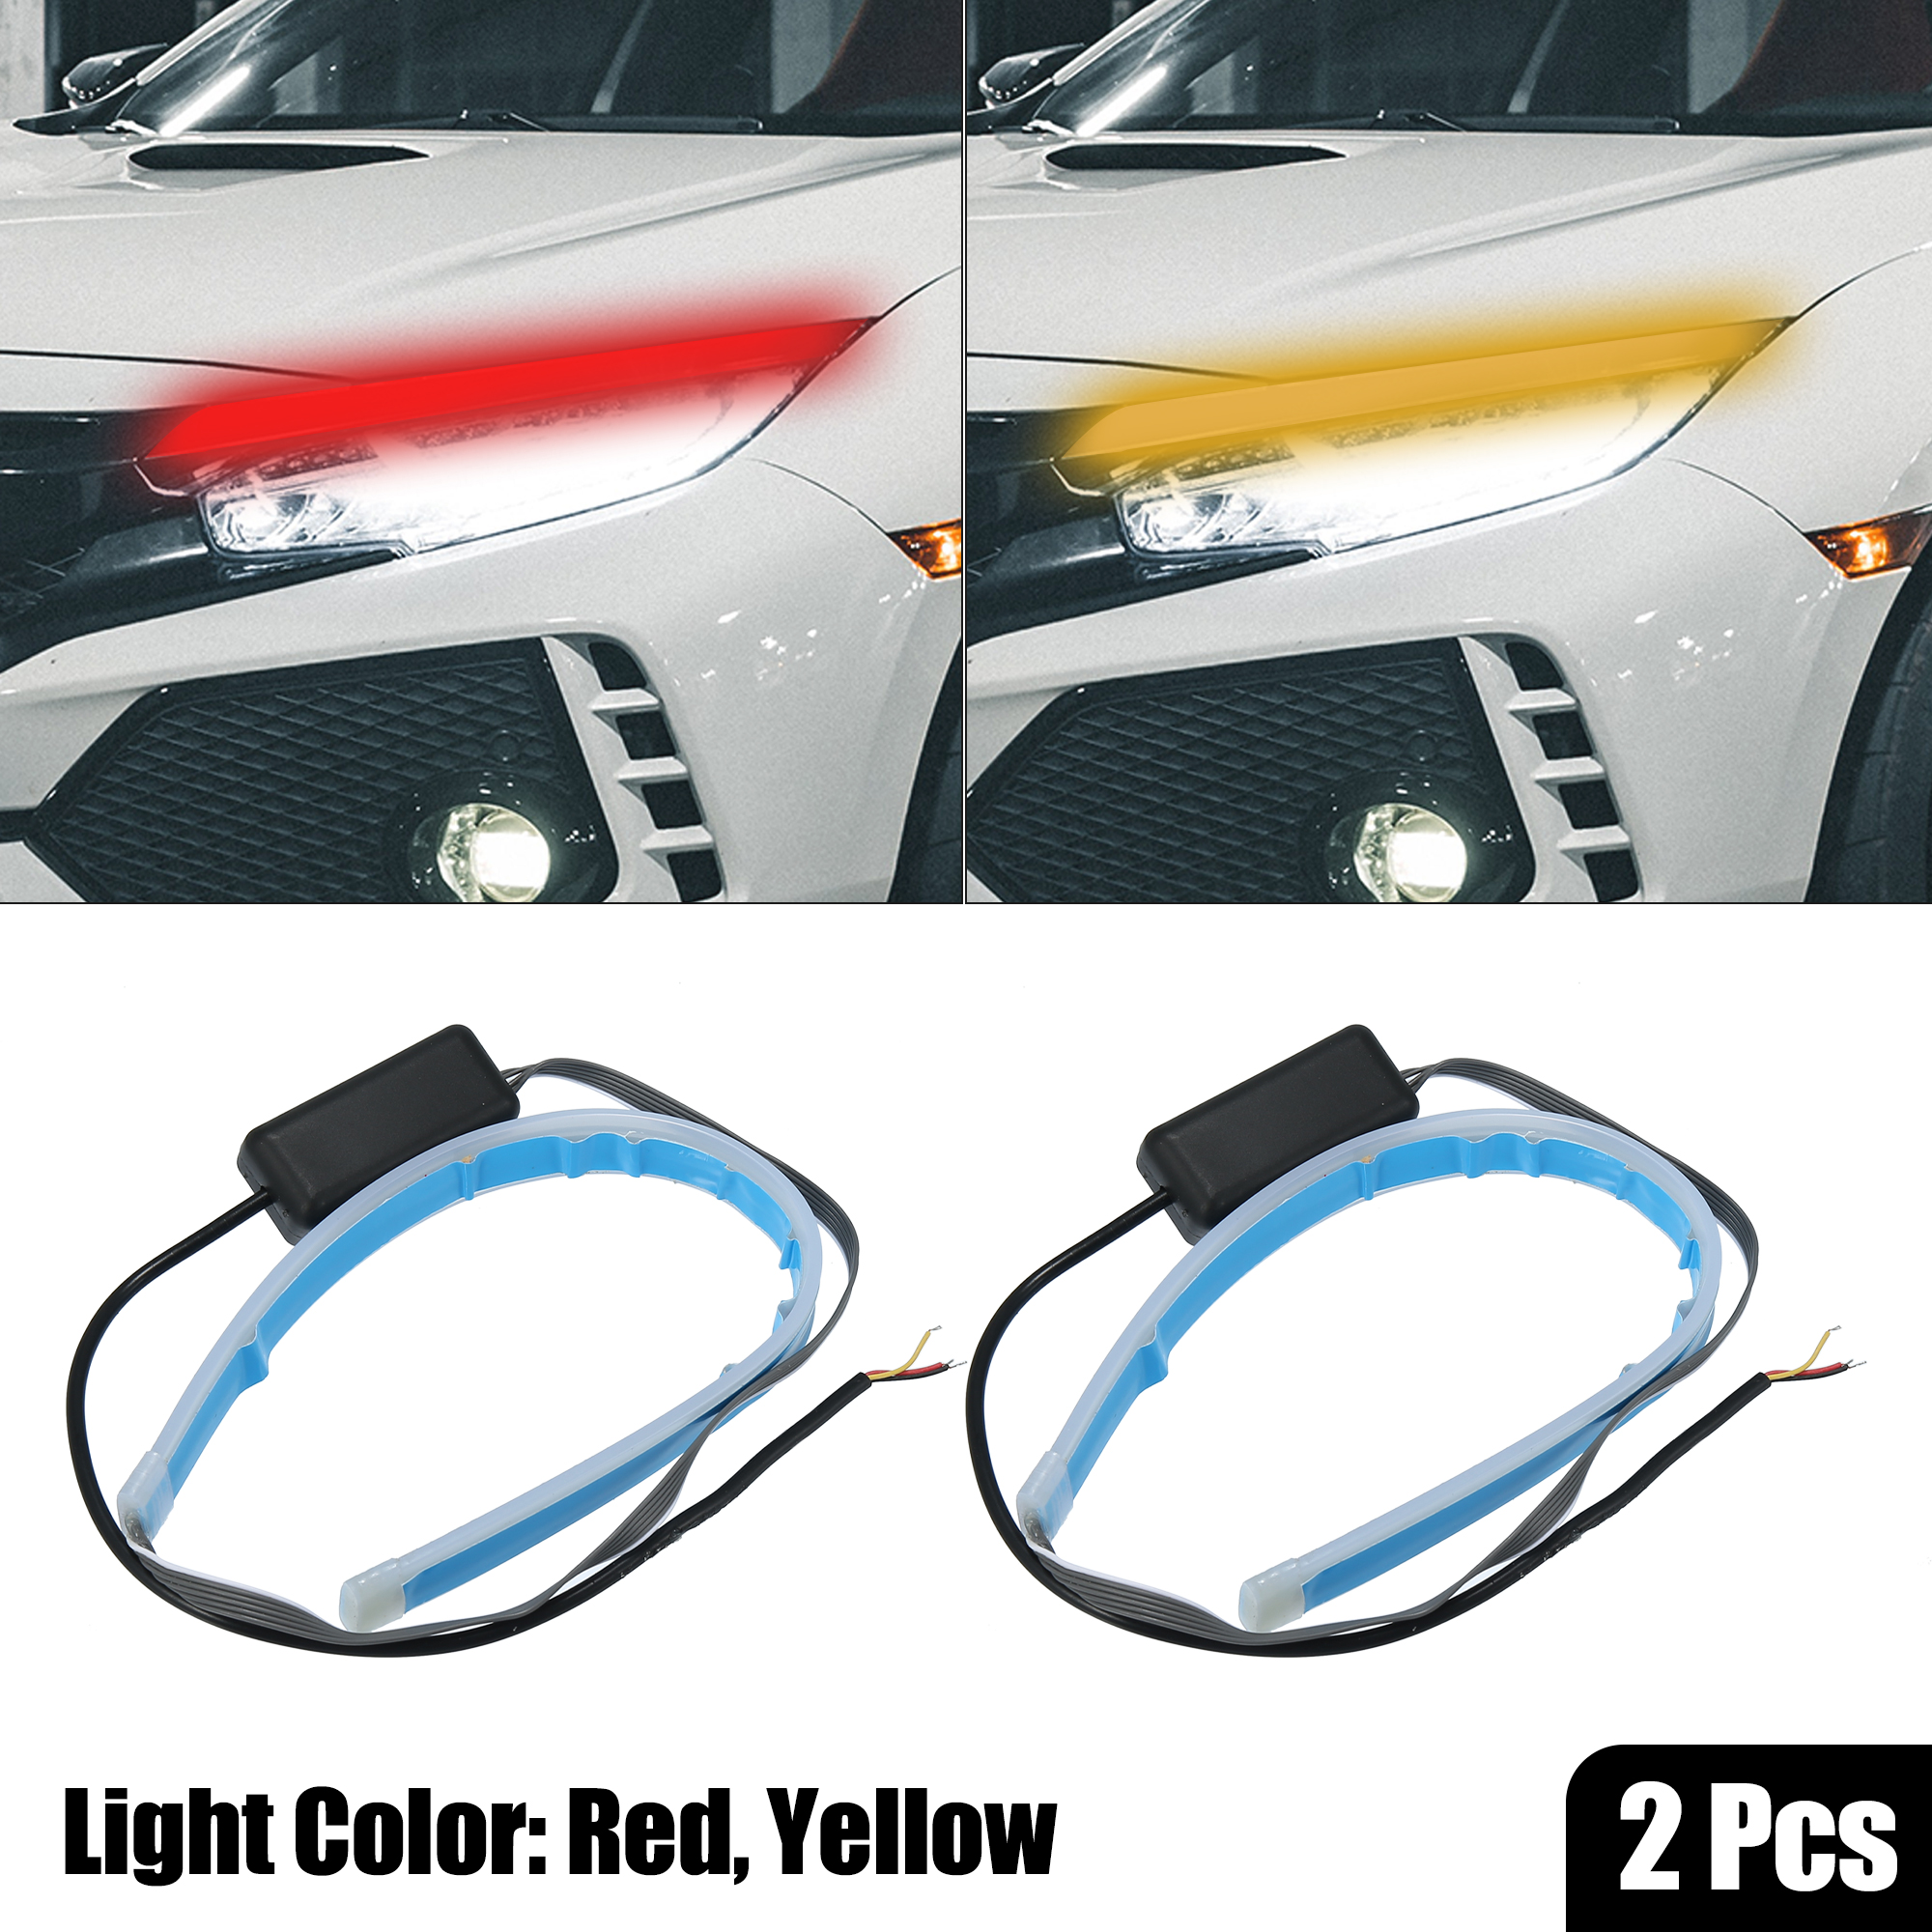 Unique Bargains 2pcs 30cm 12inch LED Headlight Strip LED Strip Light for Car Yellow and Red